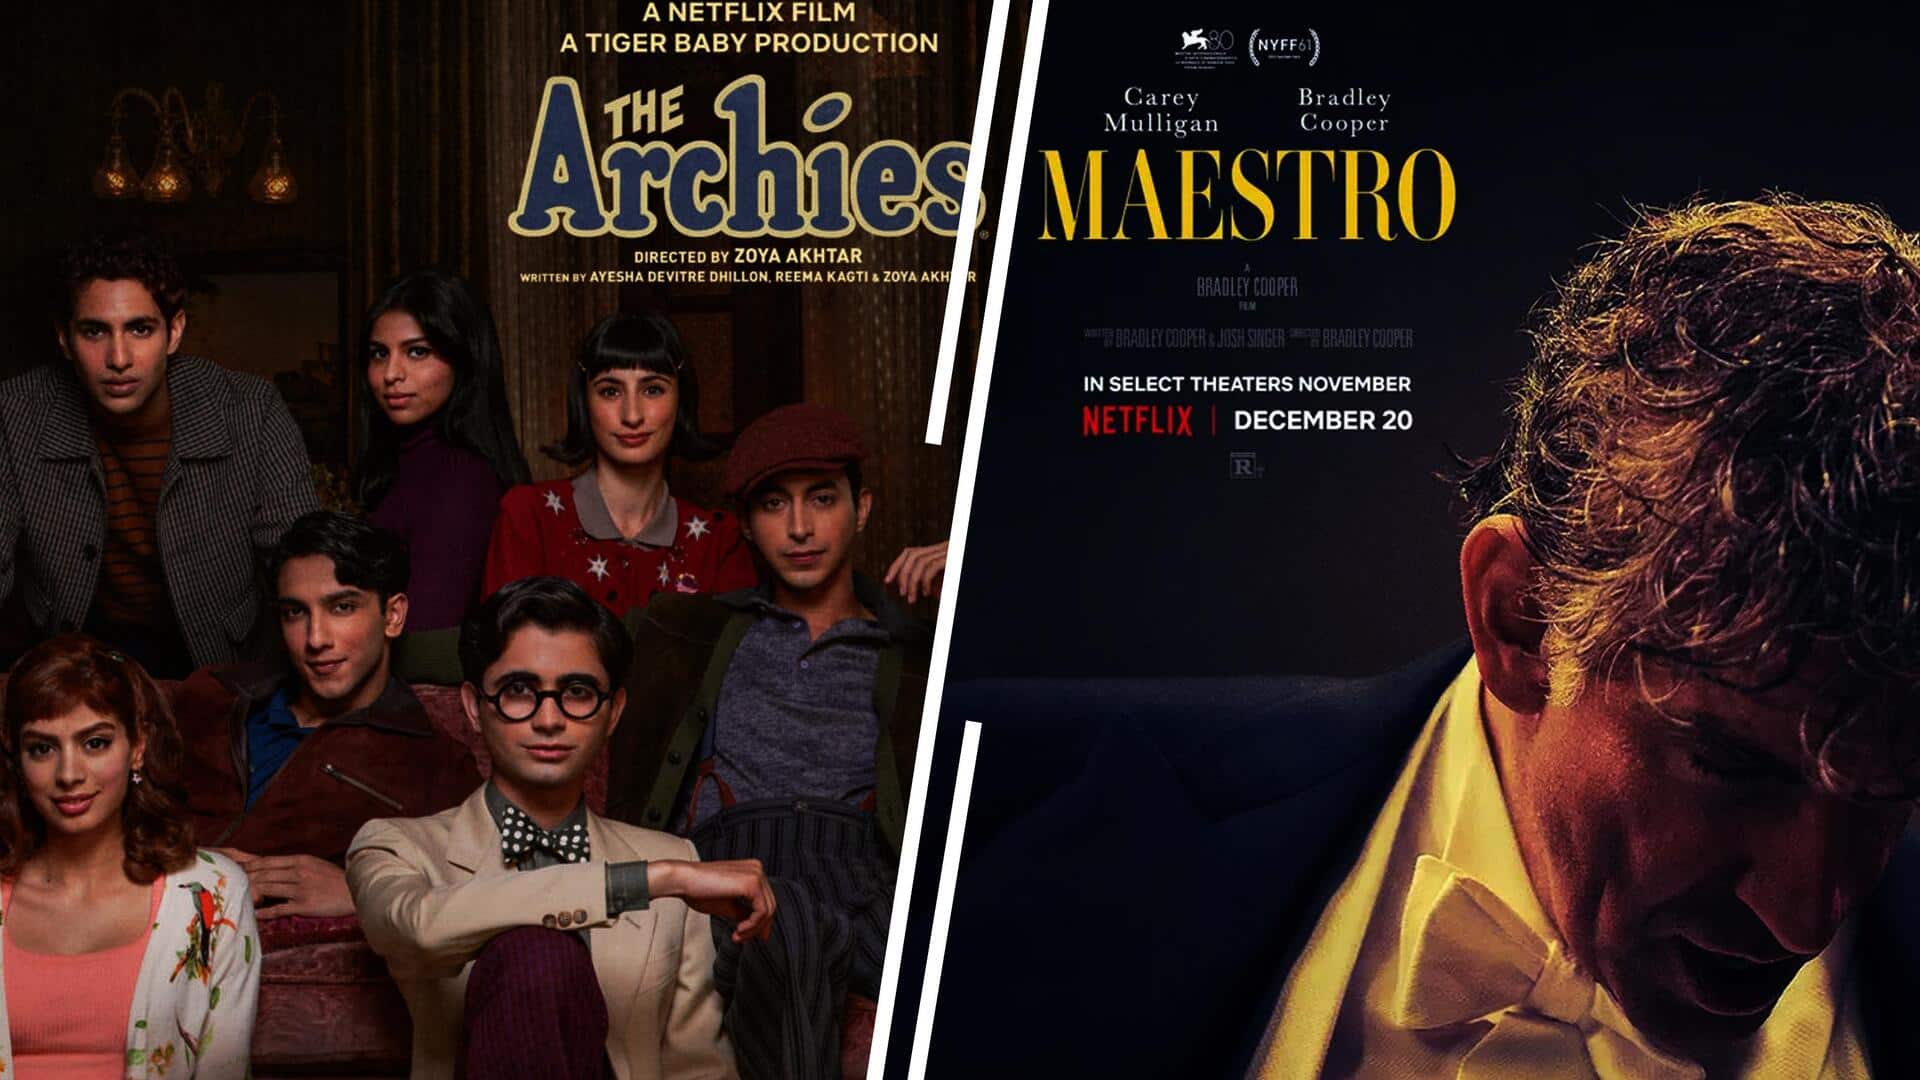 'The Archies' to 'Maestro': Big OTT titles releasing in December